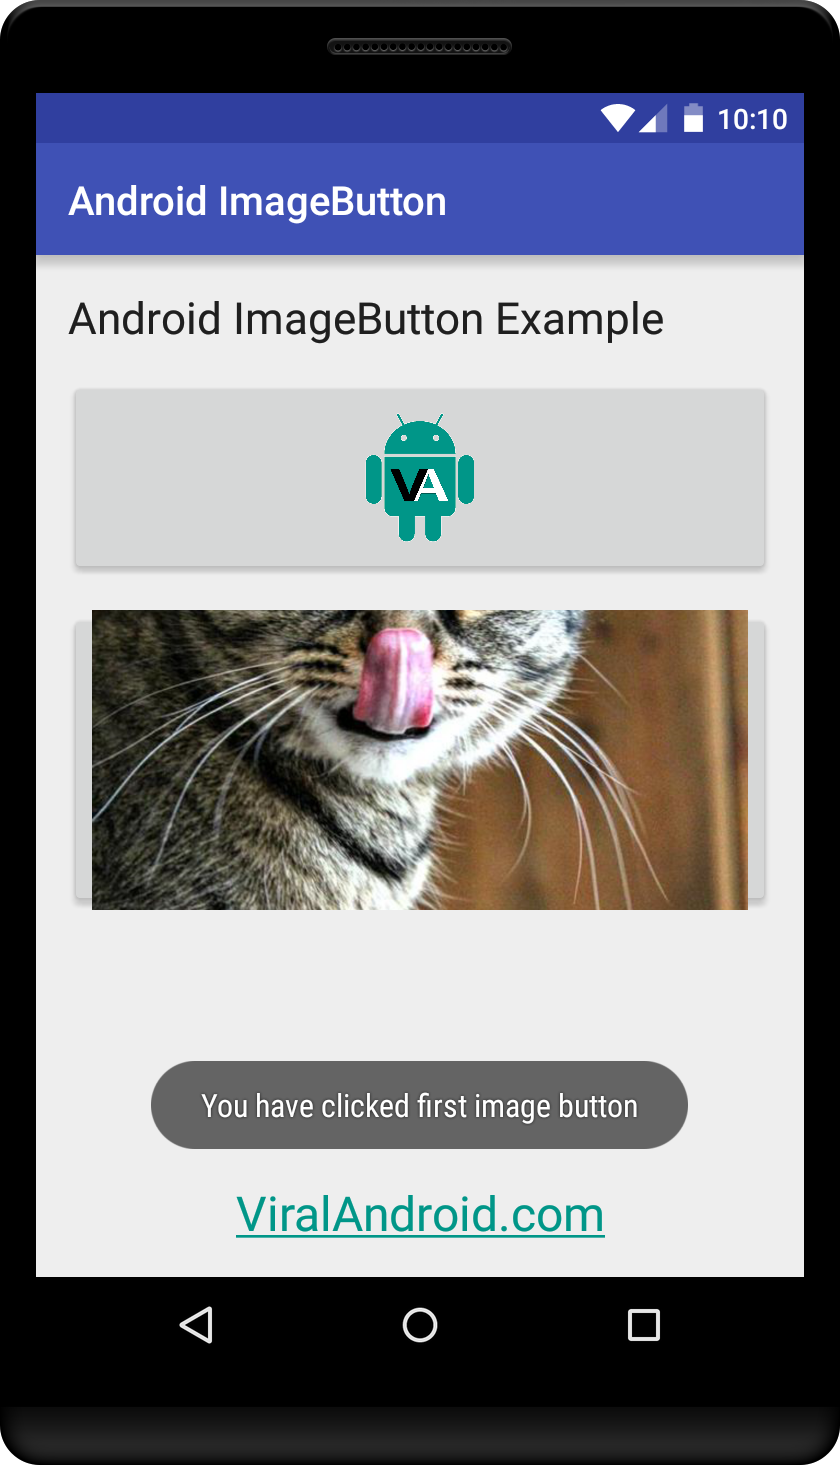 Android ImageButton Viral Android Tutorials  Examples 